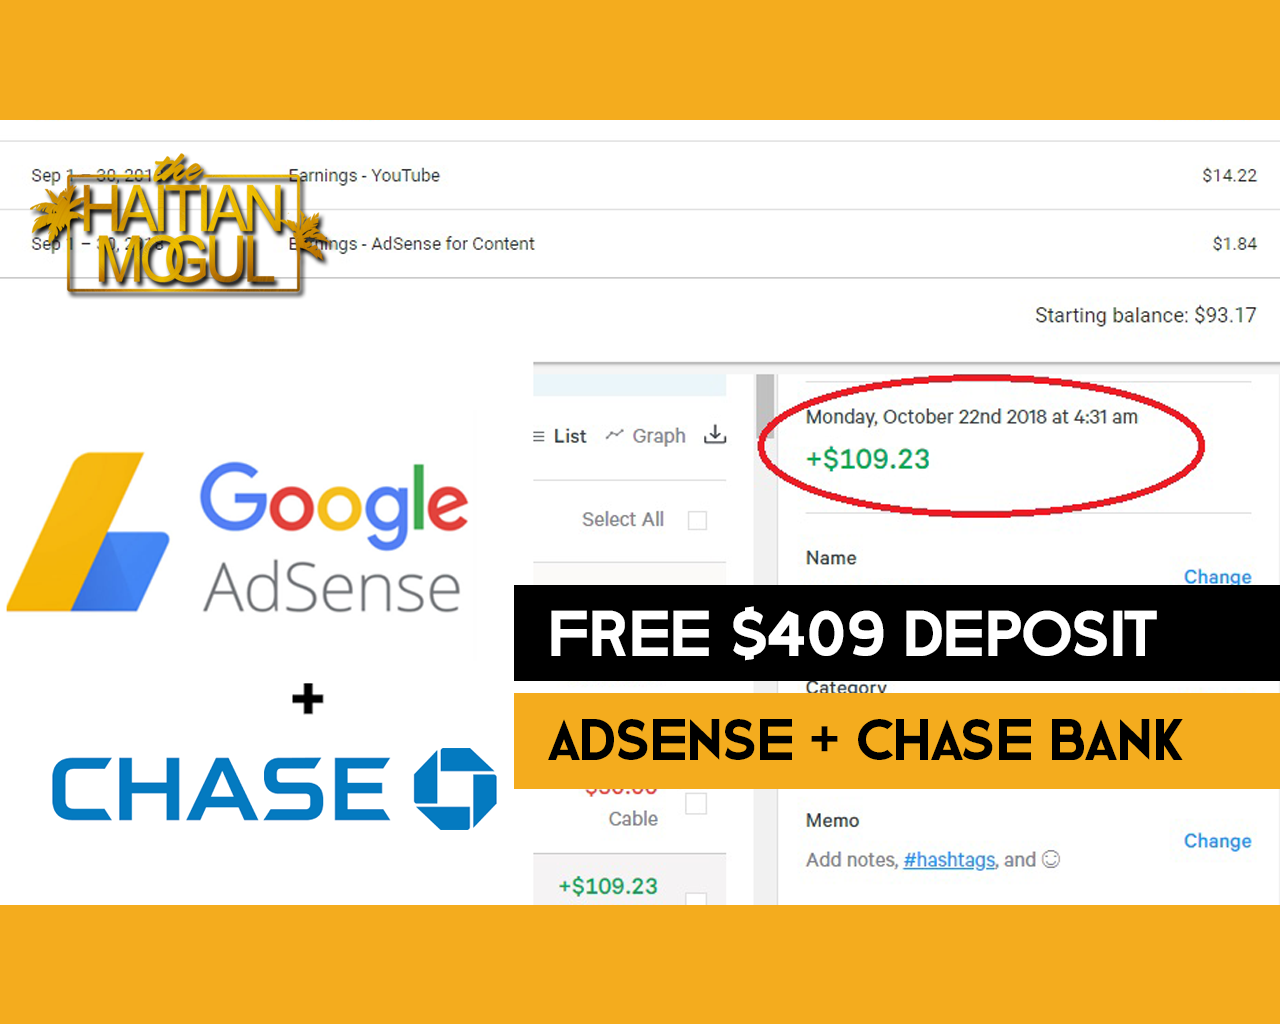 free 409 deposit with adsense and chase thumb